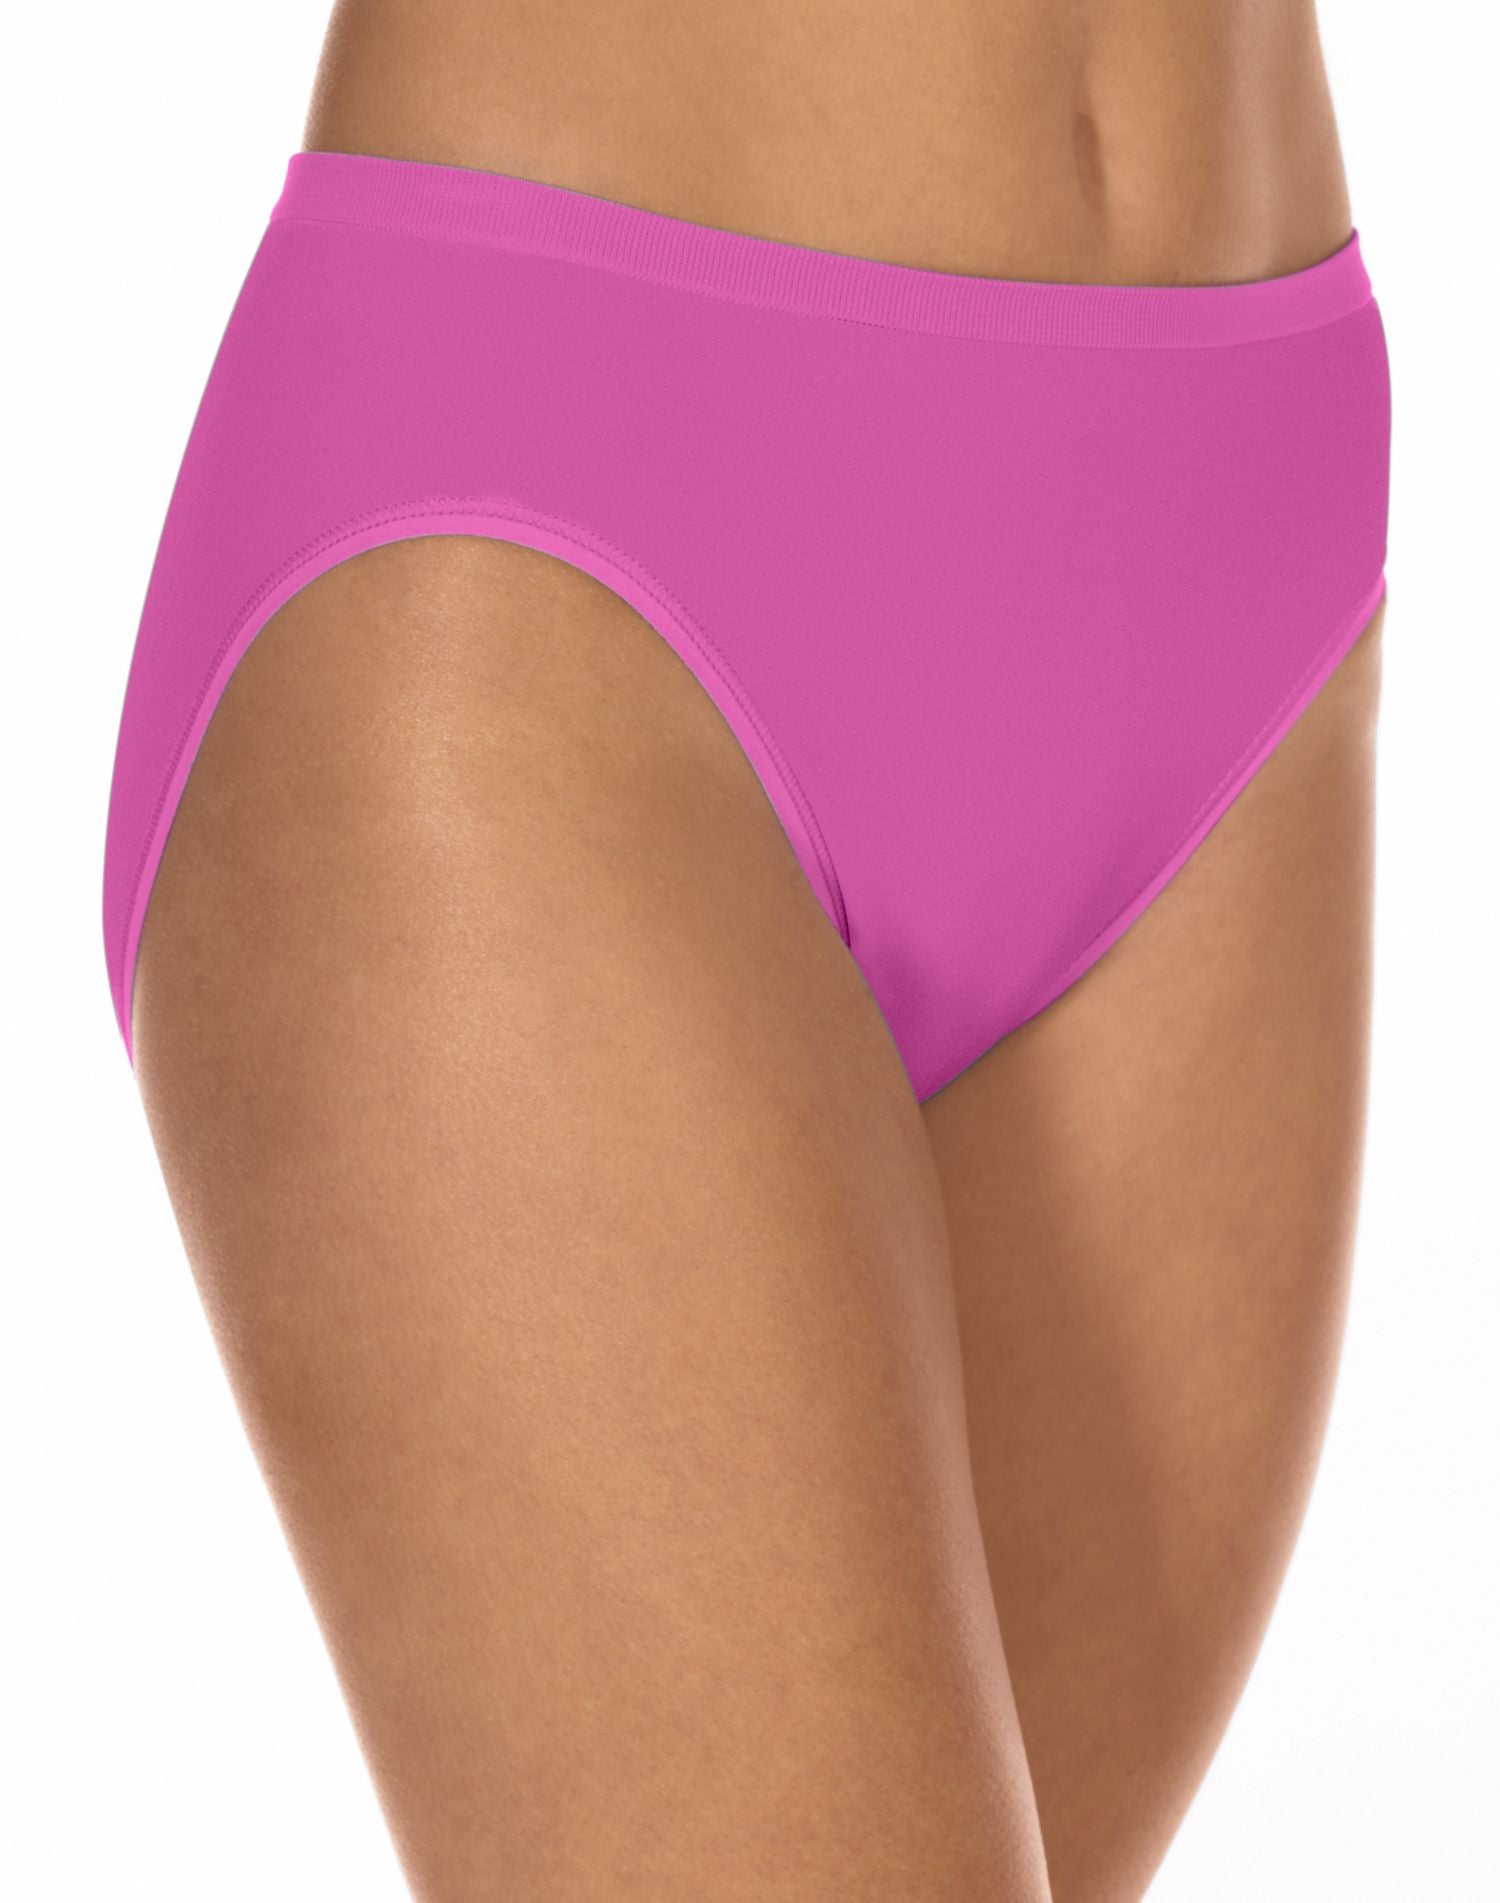 2455 - Barely There Flawless Fit Microfiber Hi-Cut Panty